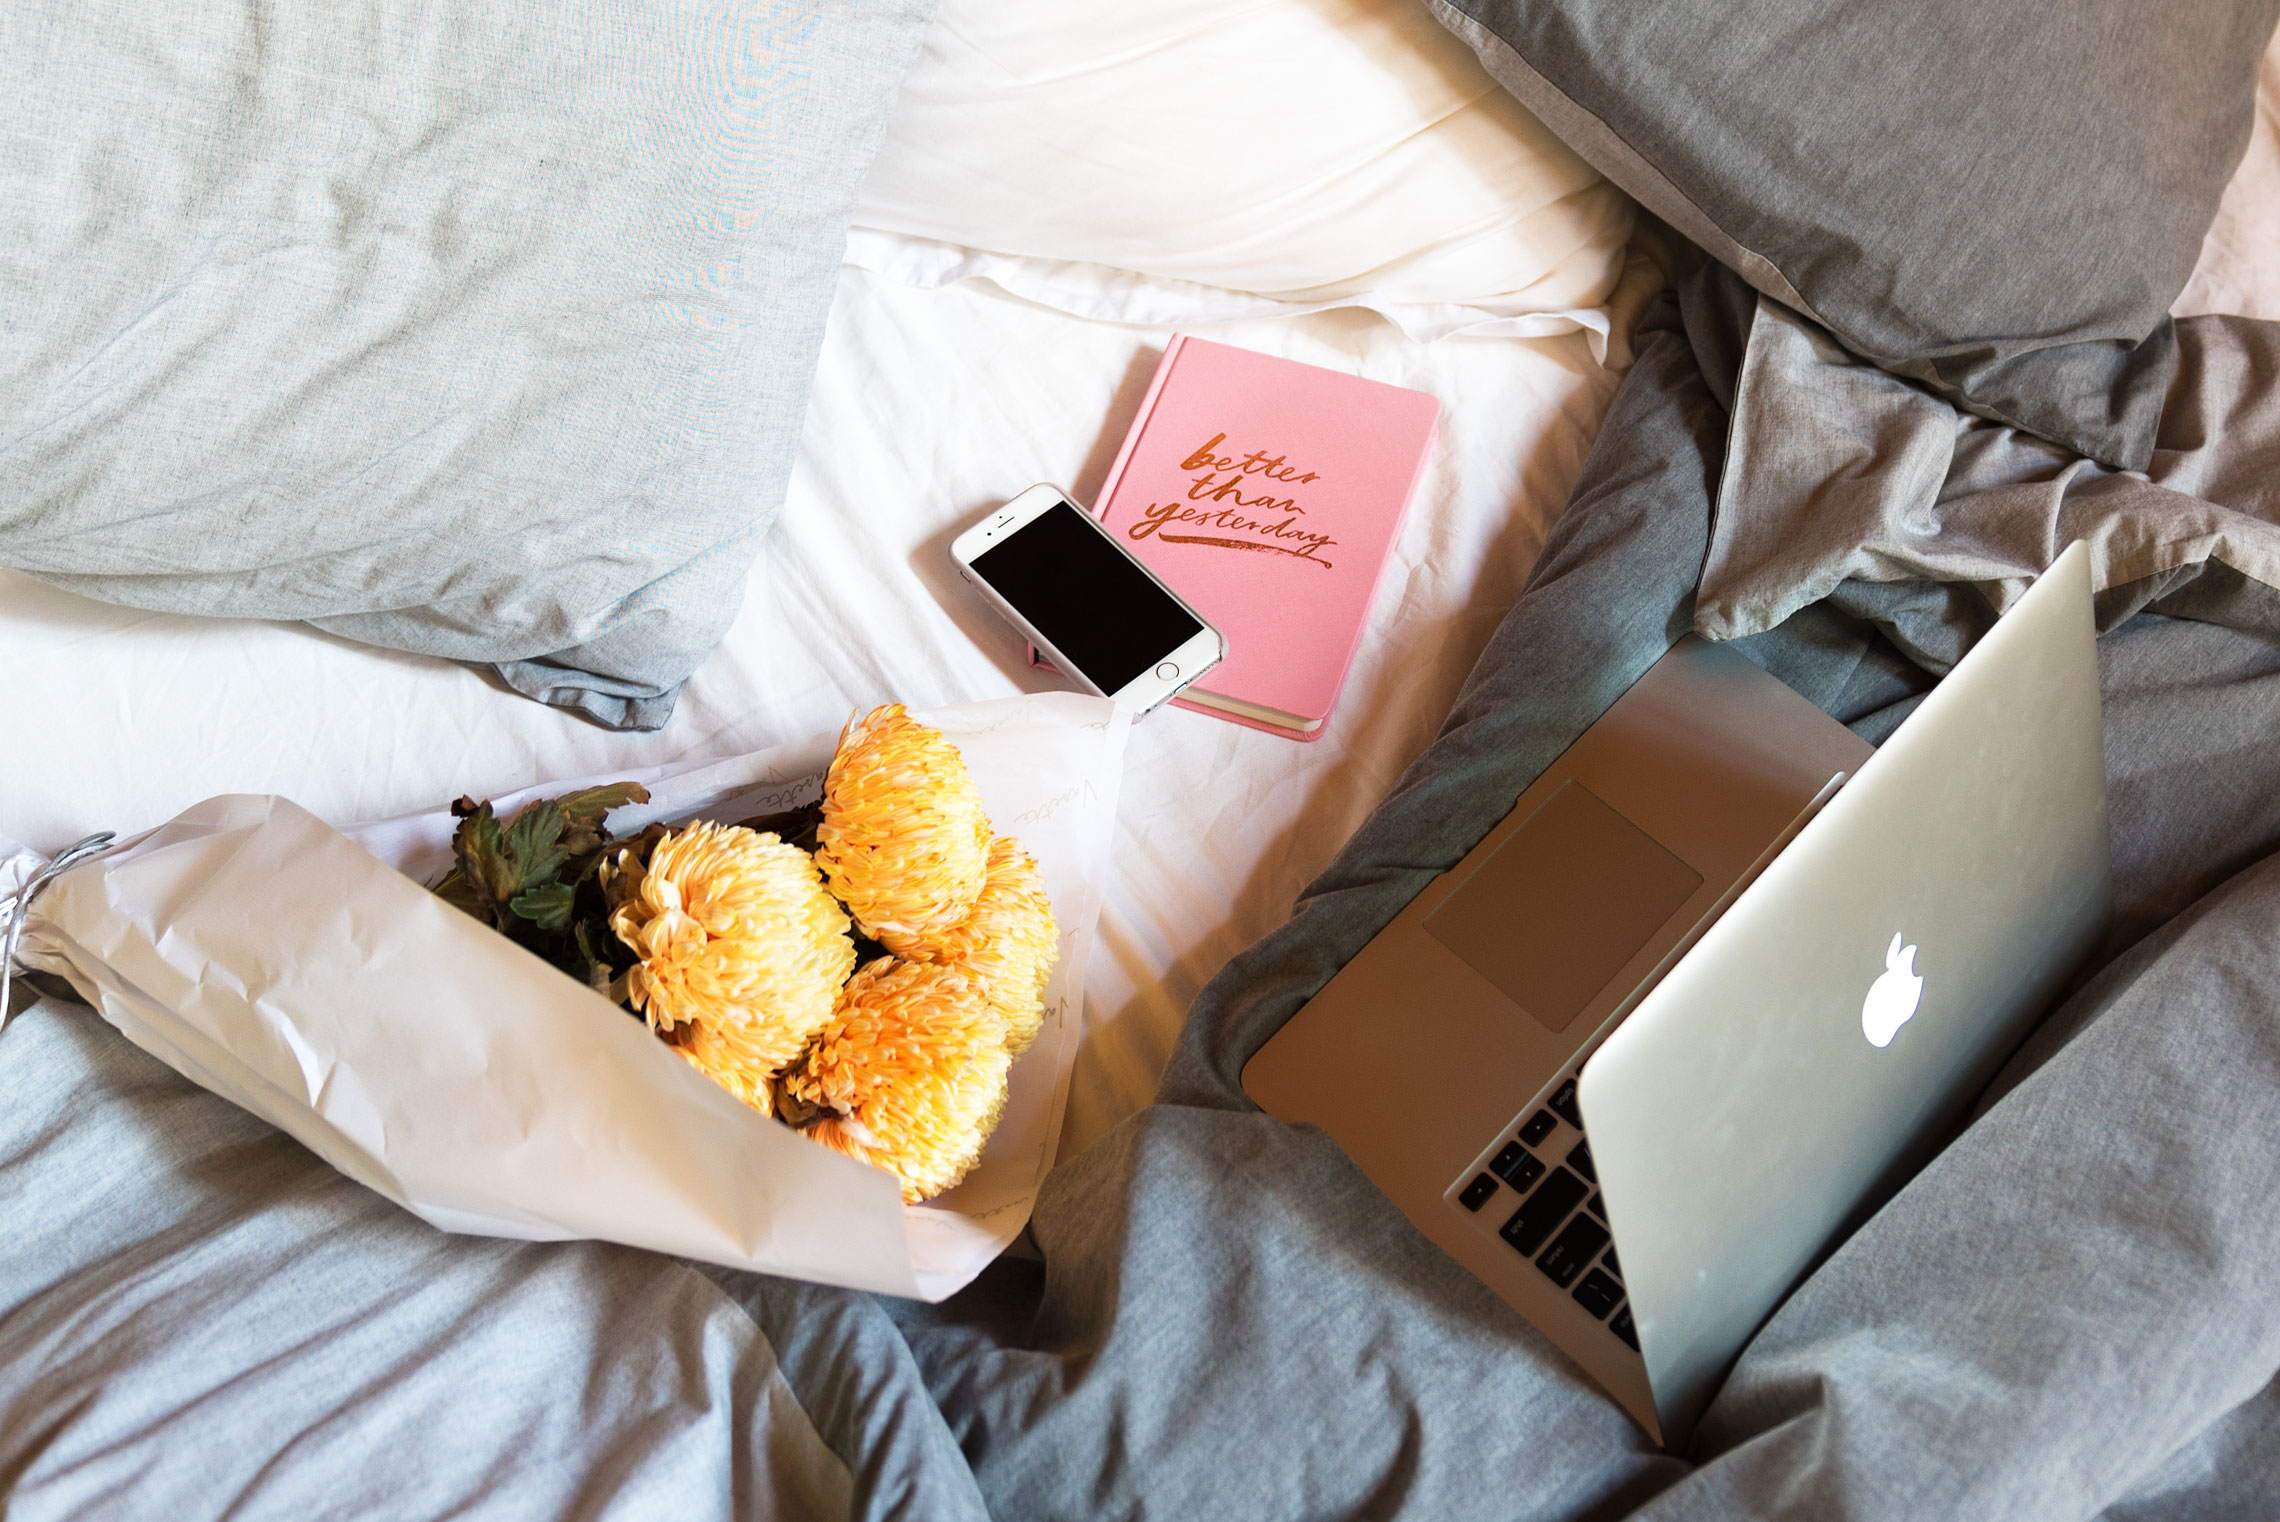 Why No One is Reading Your Blog, Laptop, Bed